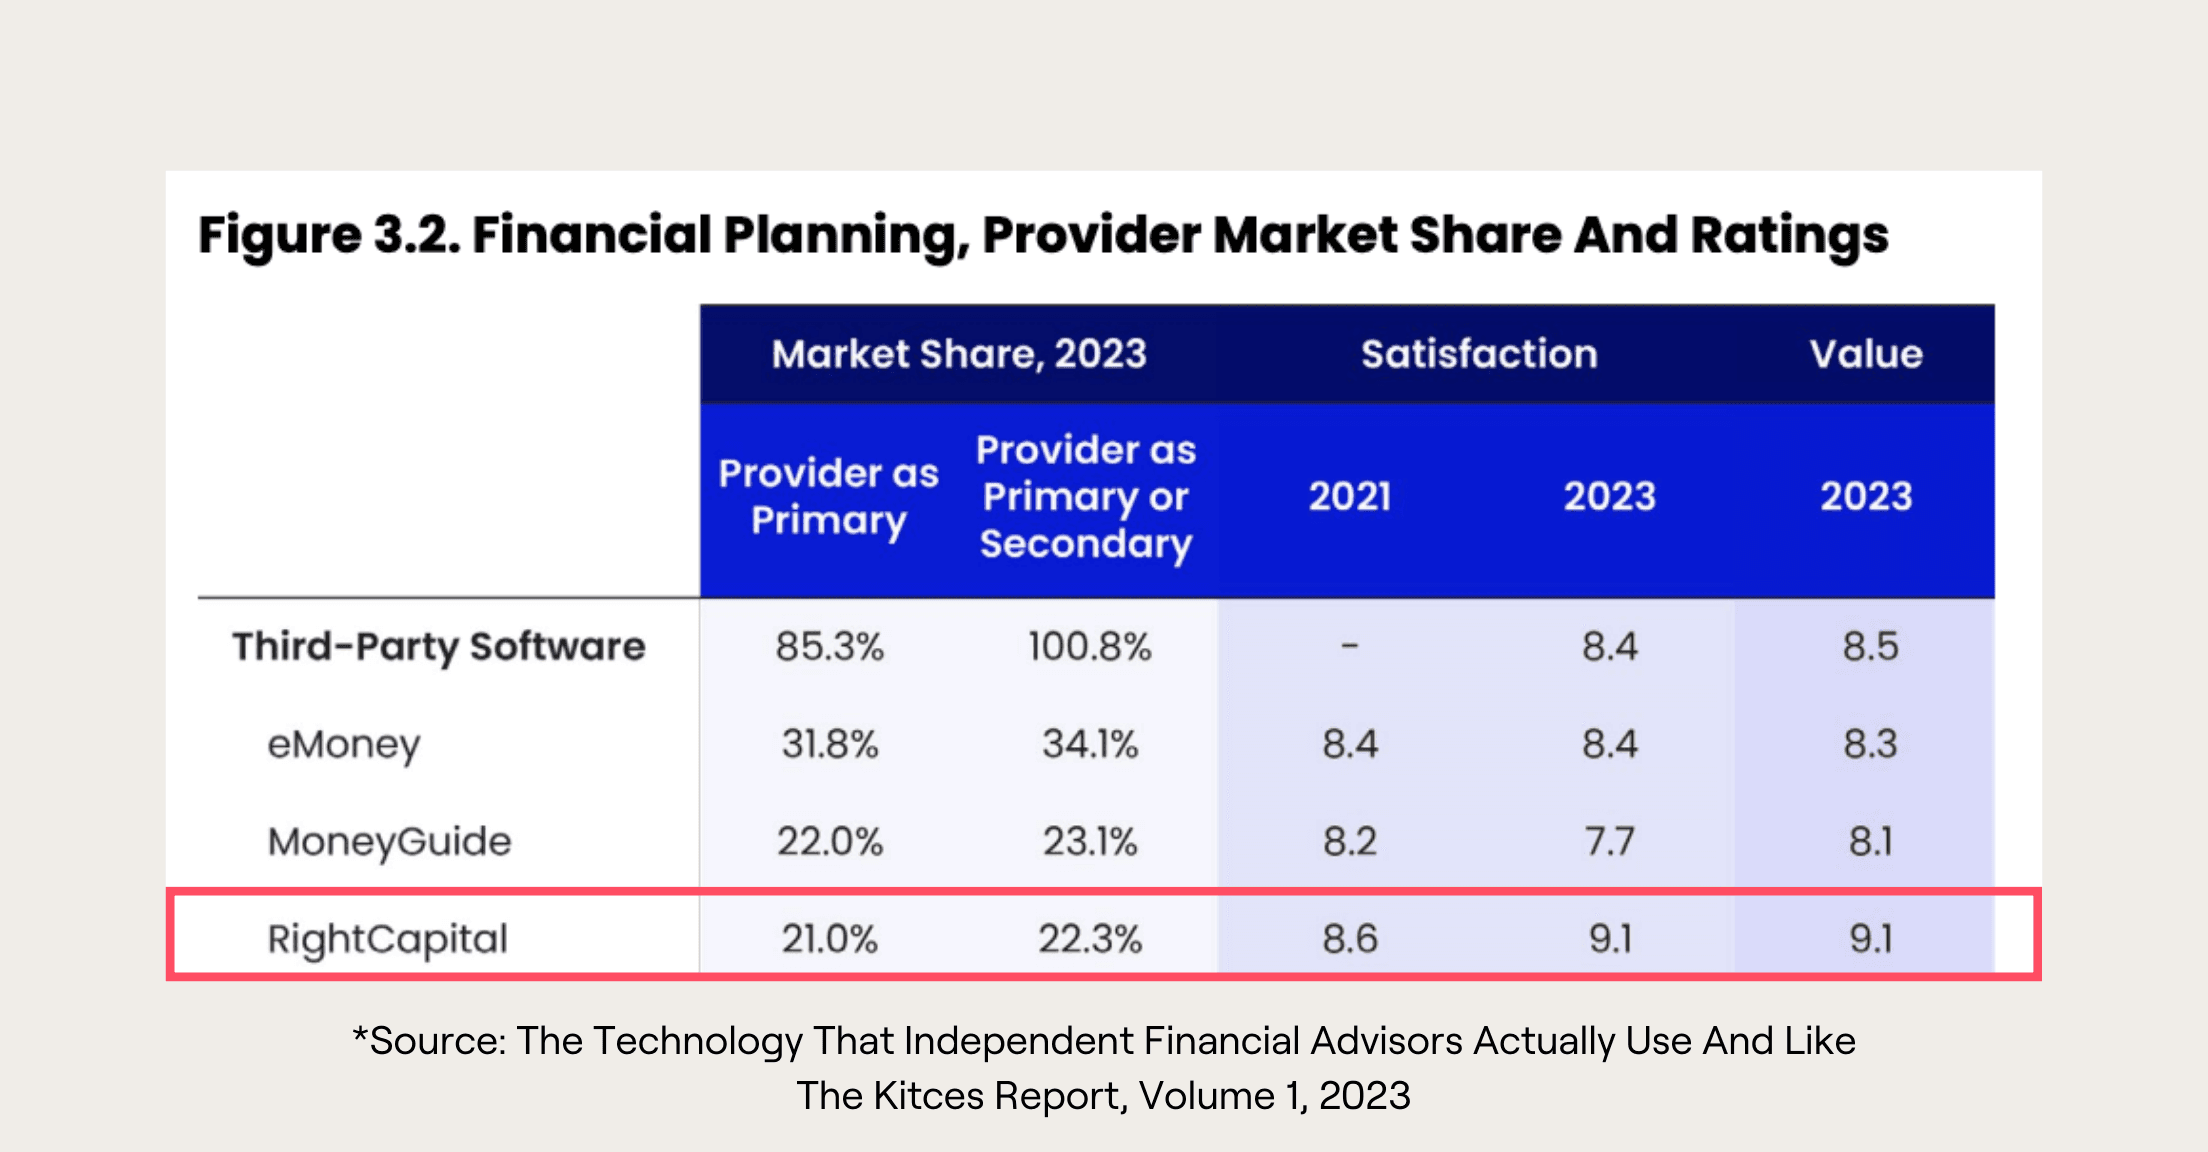 Chart from August 2023 Kitces Report showing RightCapital with growing satisfaction and market share compared to eMoney and MoneyGuidePro